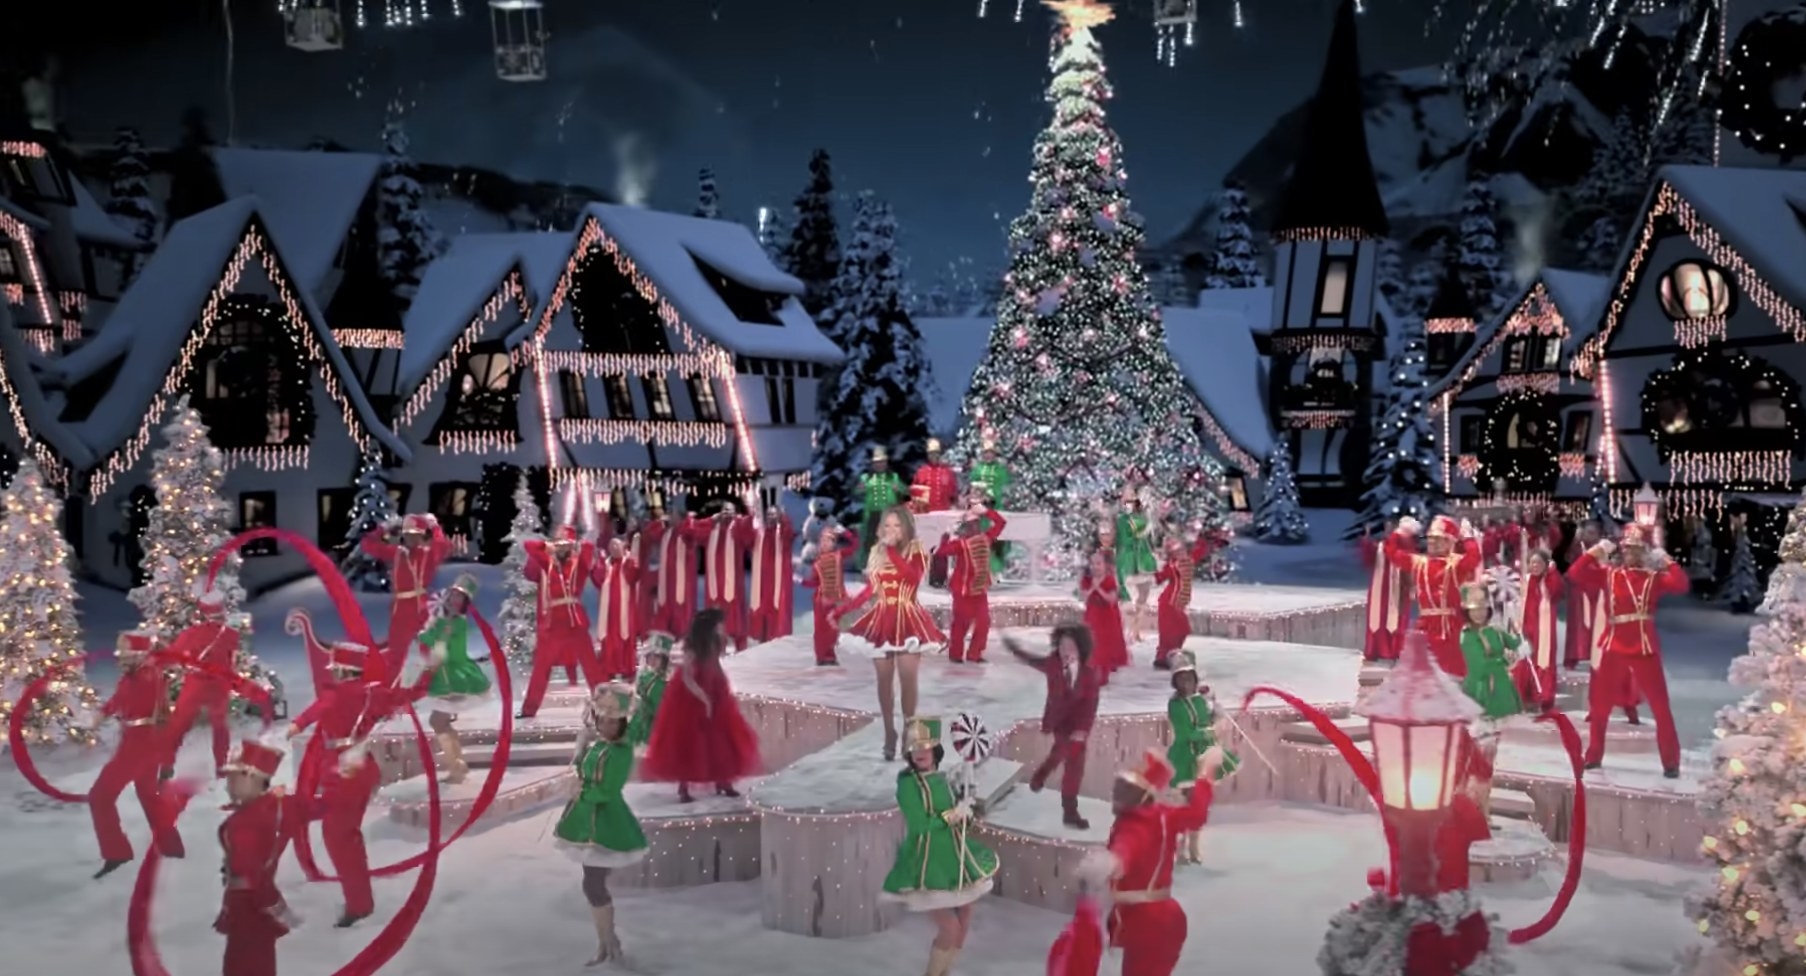 Mariah Carey surrounded by elves